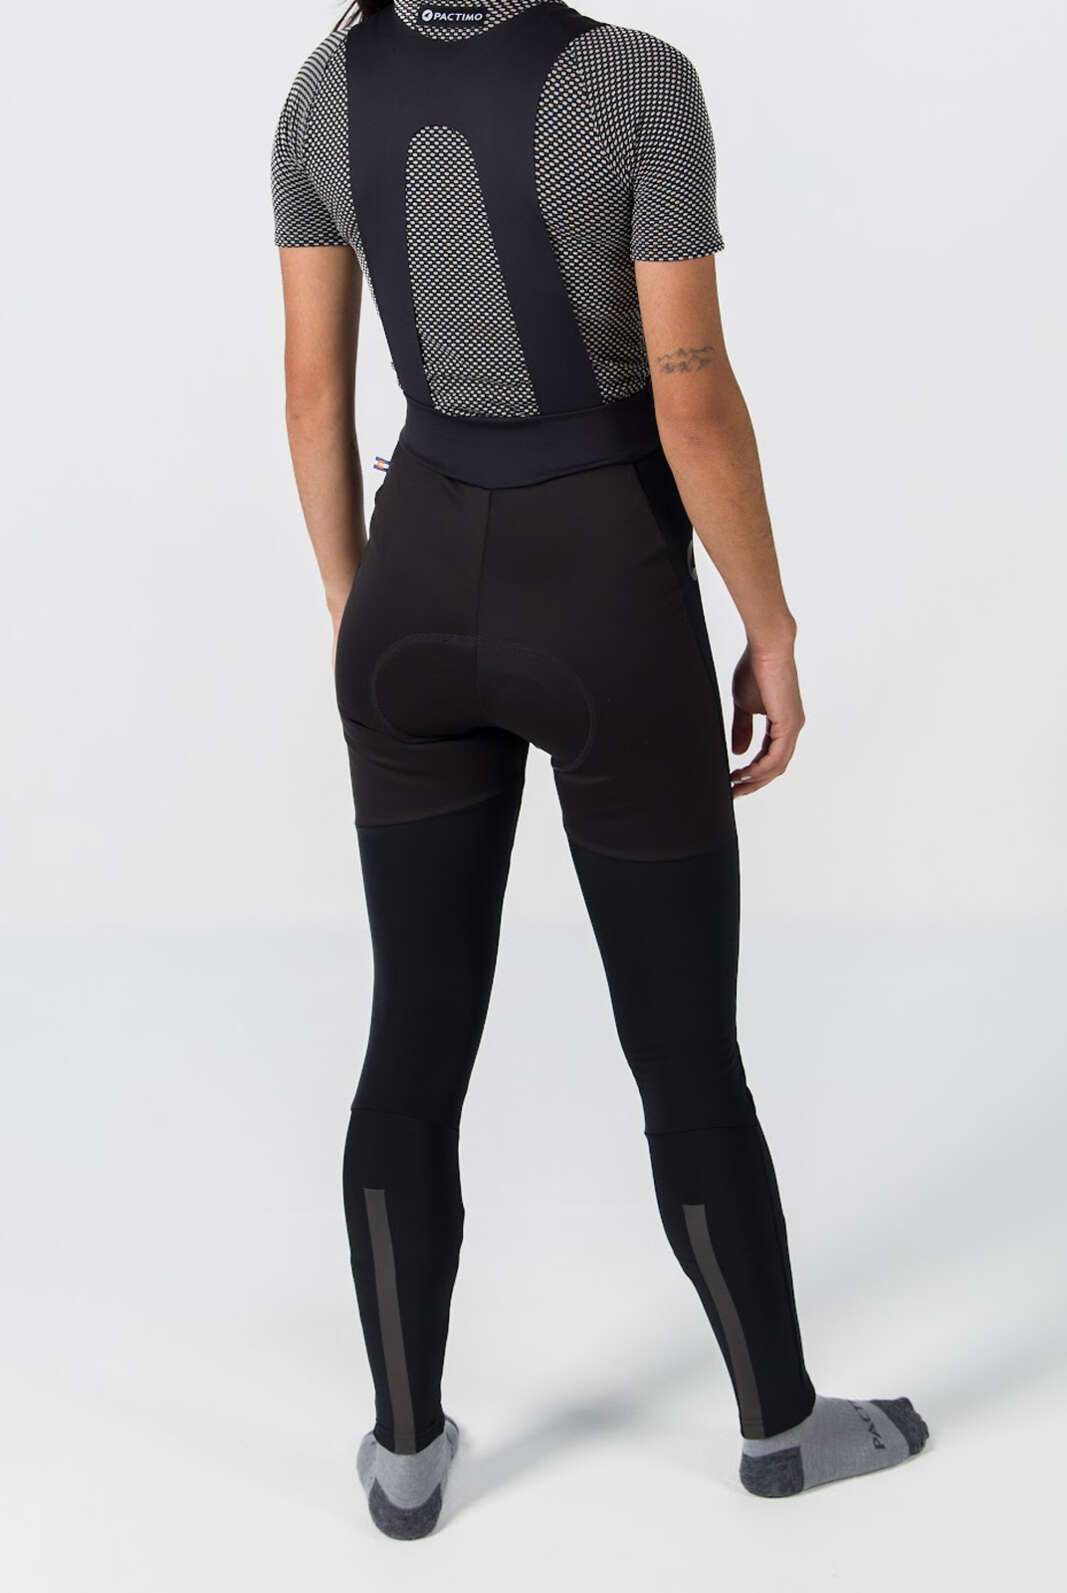 Women's Thermal Cycling Bib Tights, Water-Repelling